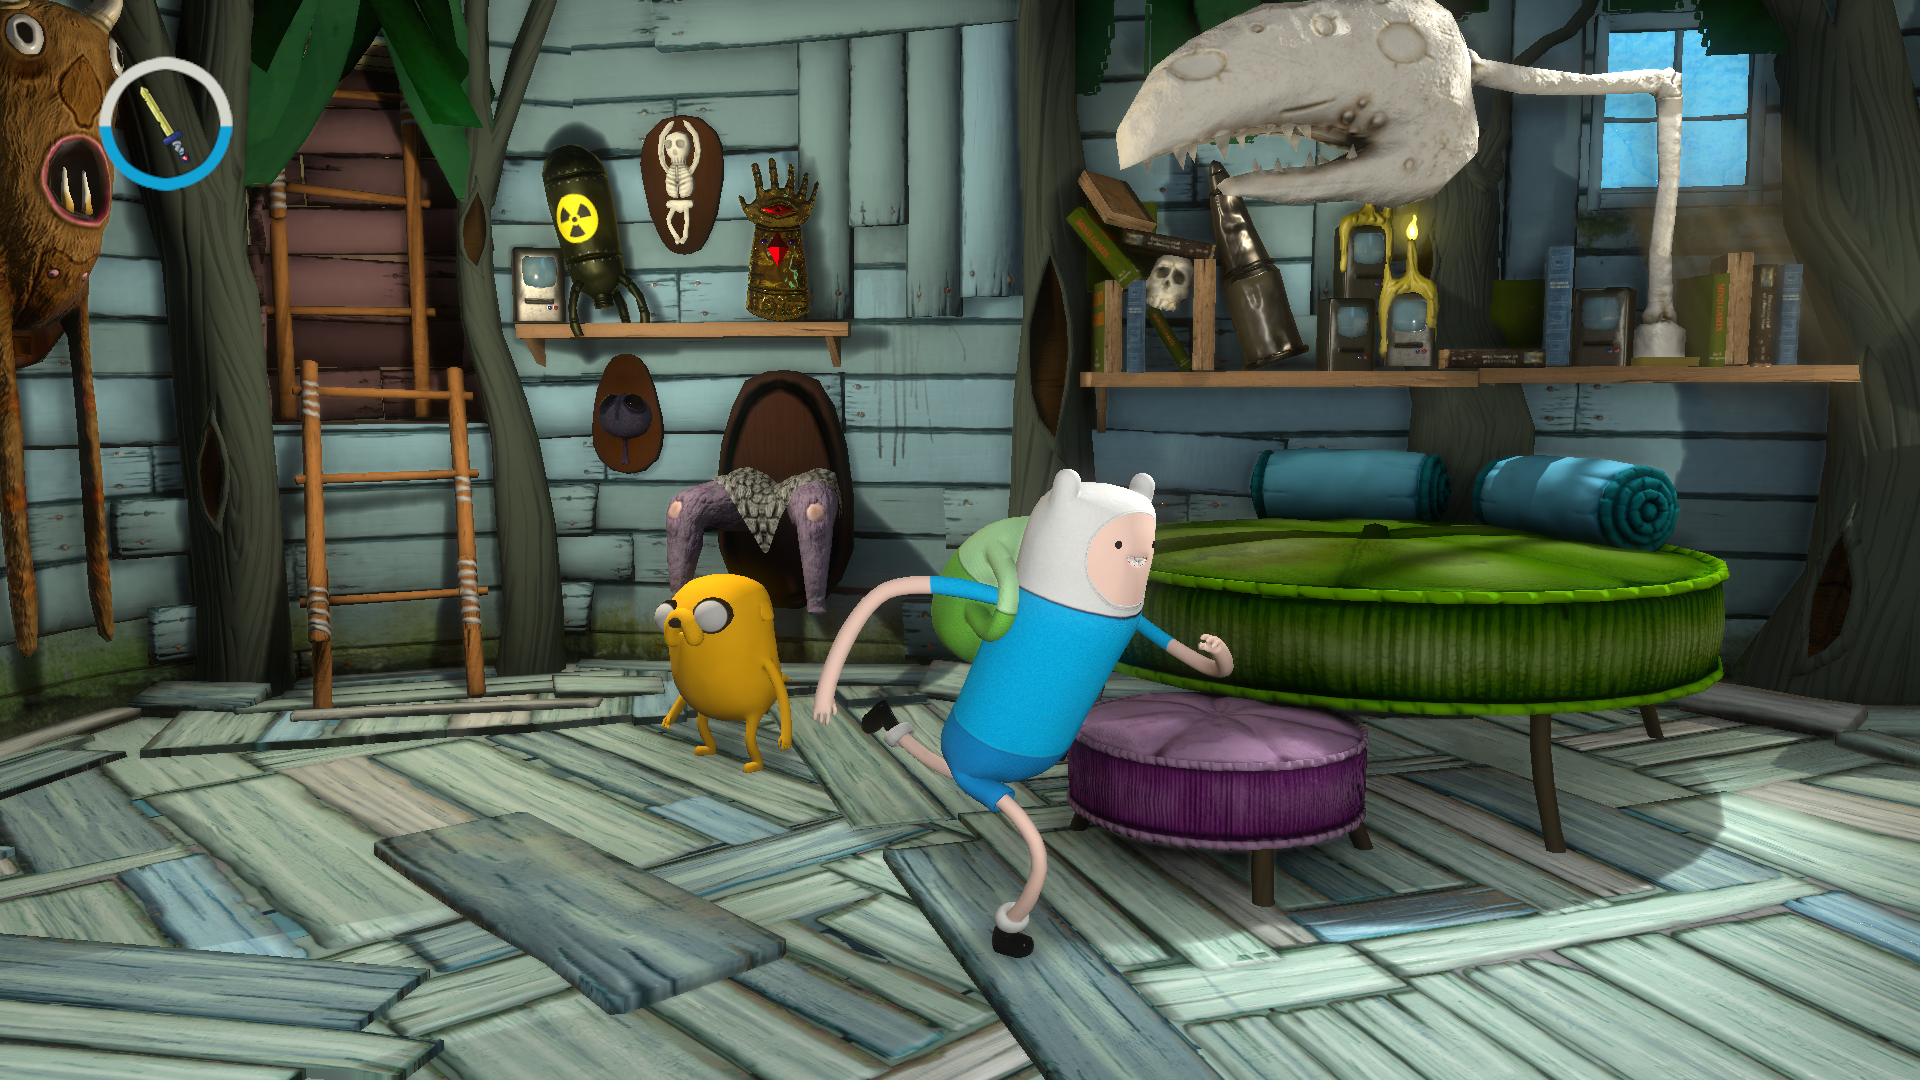 finn and jake video game